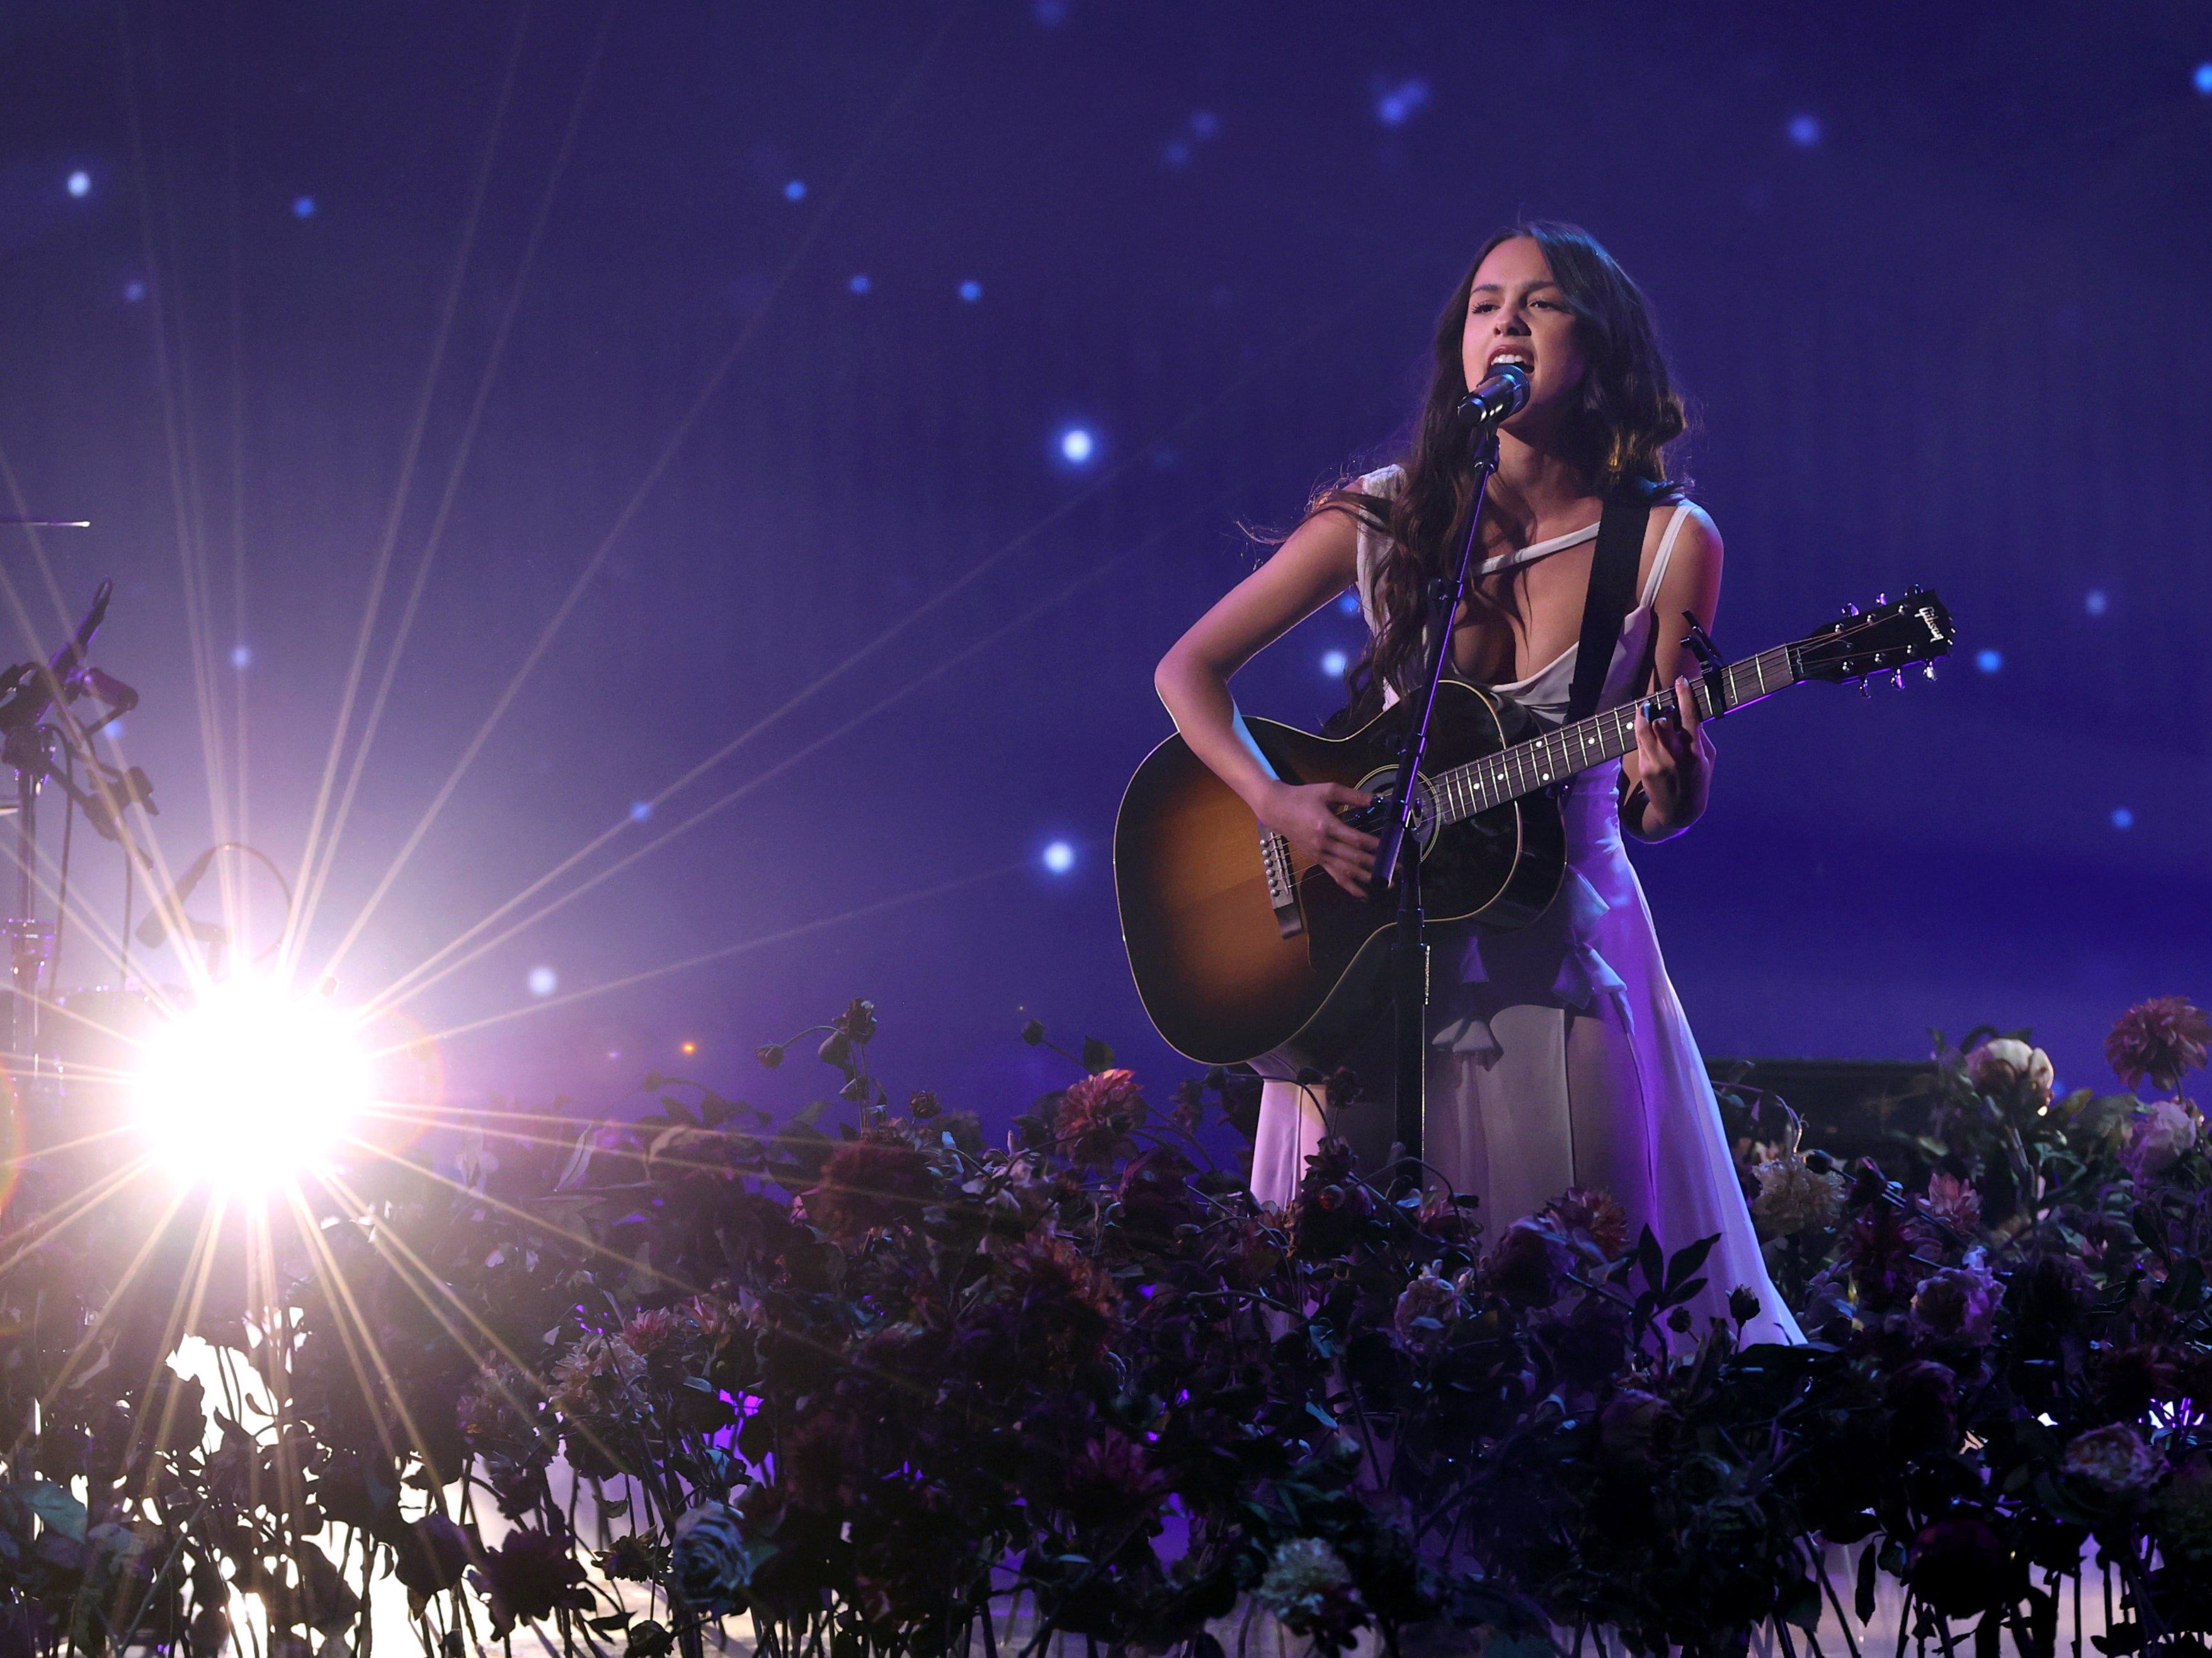 Olivia Rodrigo performing onstage during the 2021 American Music Awards.